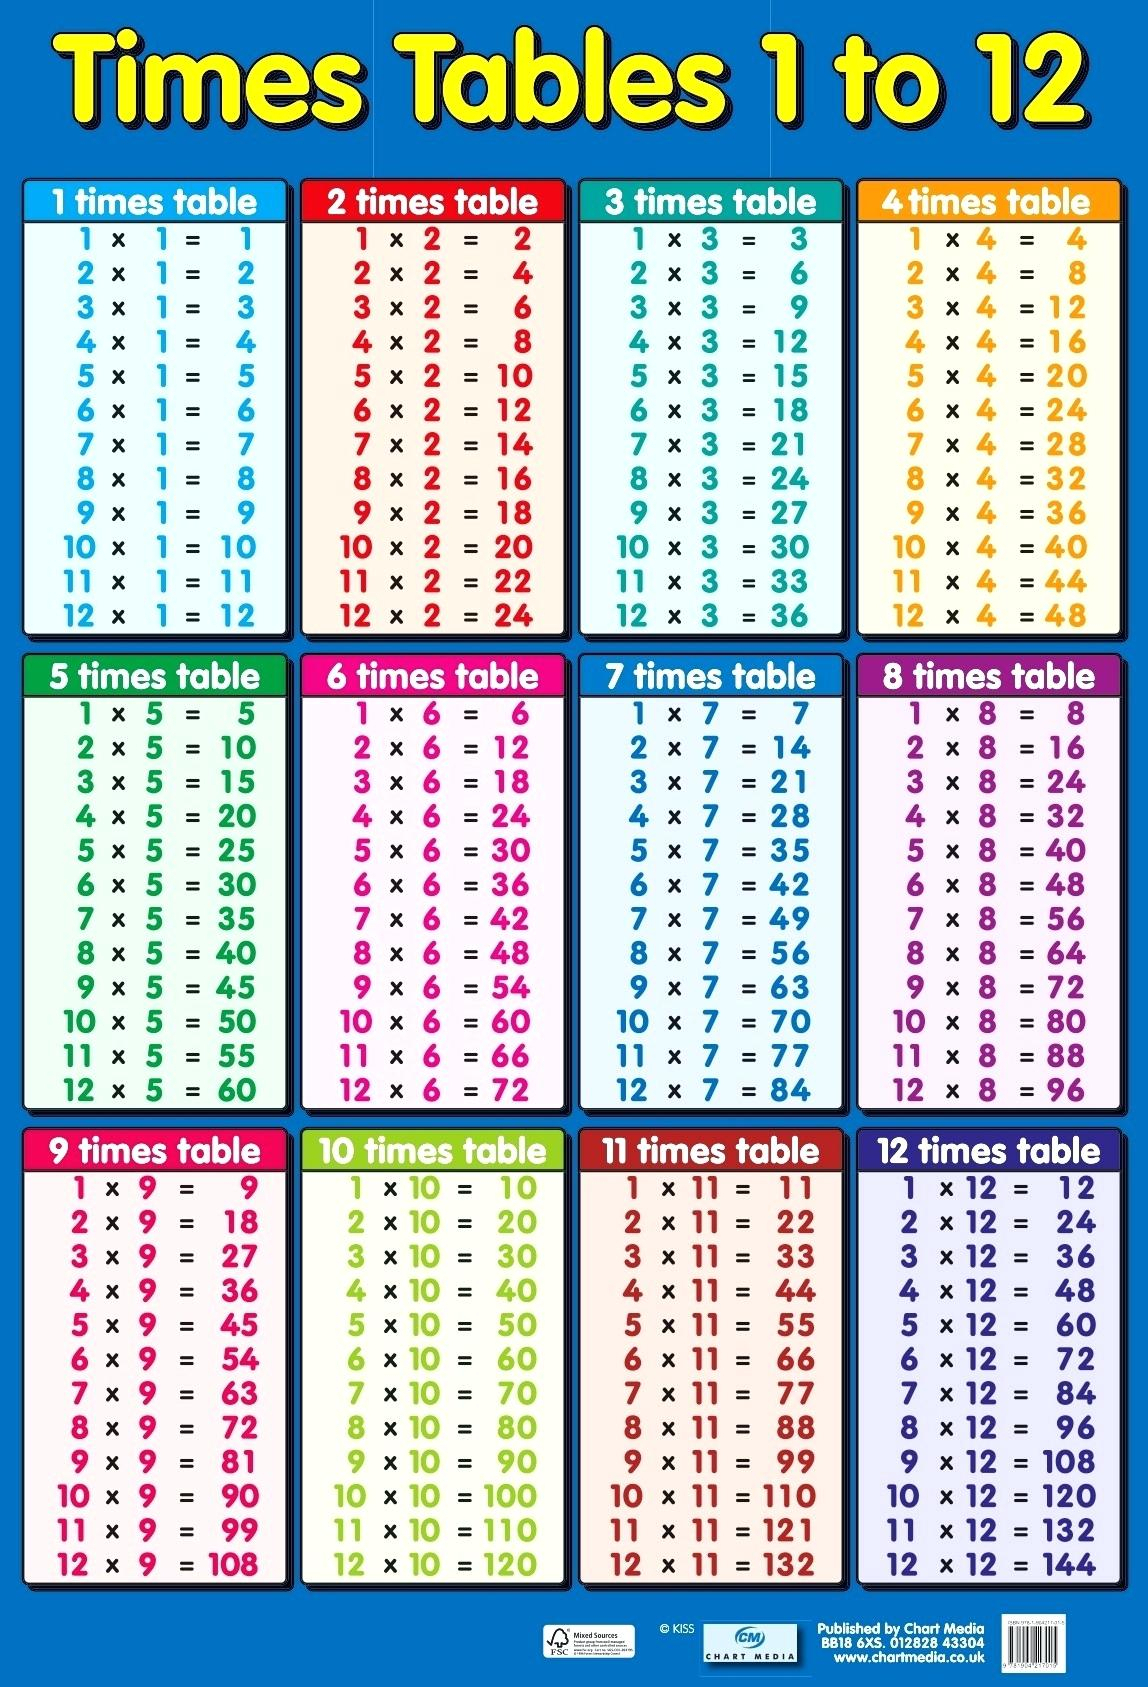 Printable Blank Multiplication Table 0-12 intended for Printable Multiplication Table Up To 12